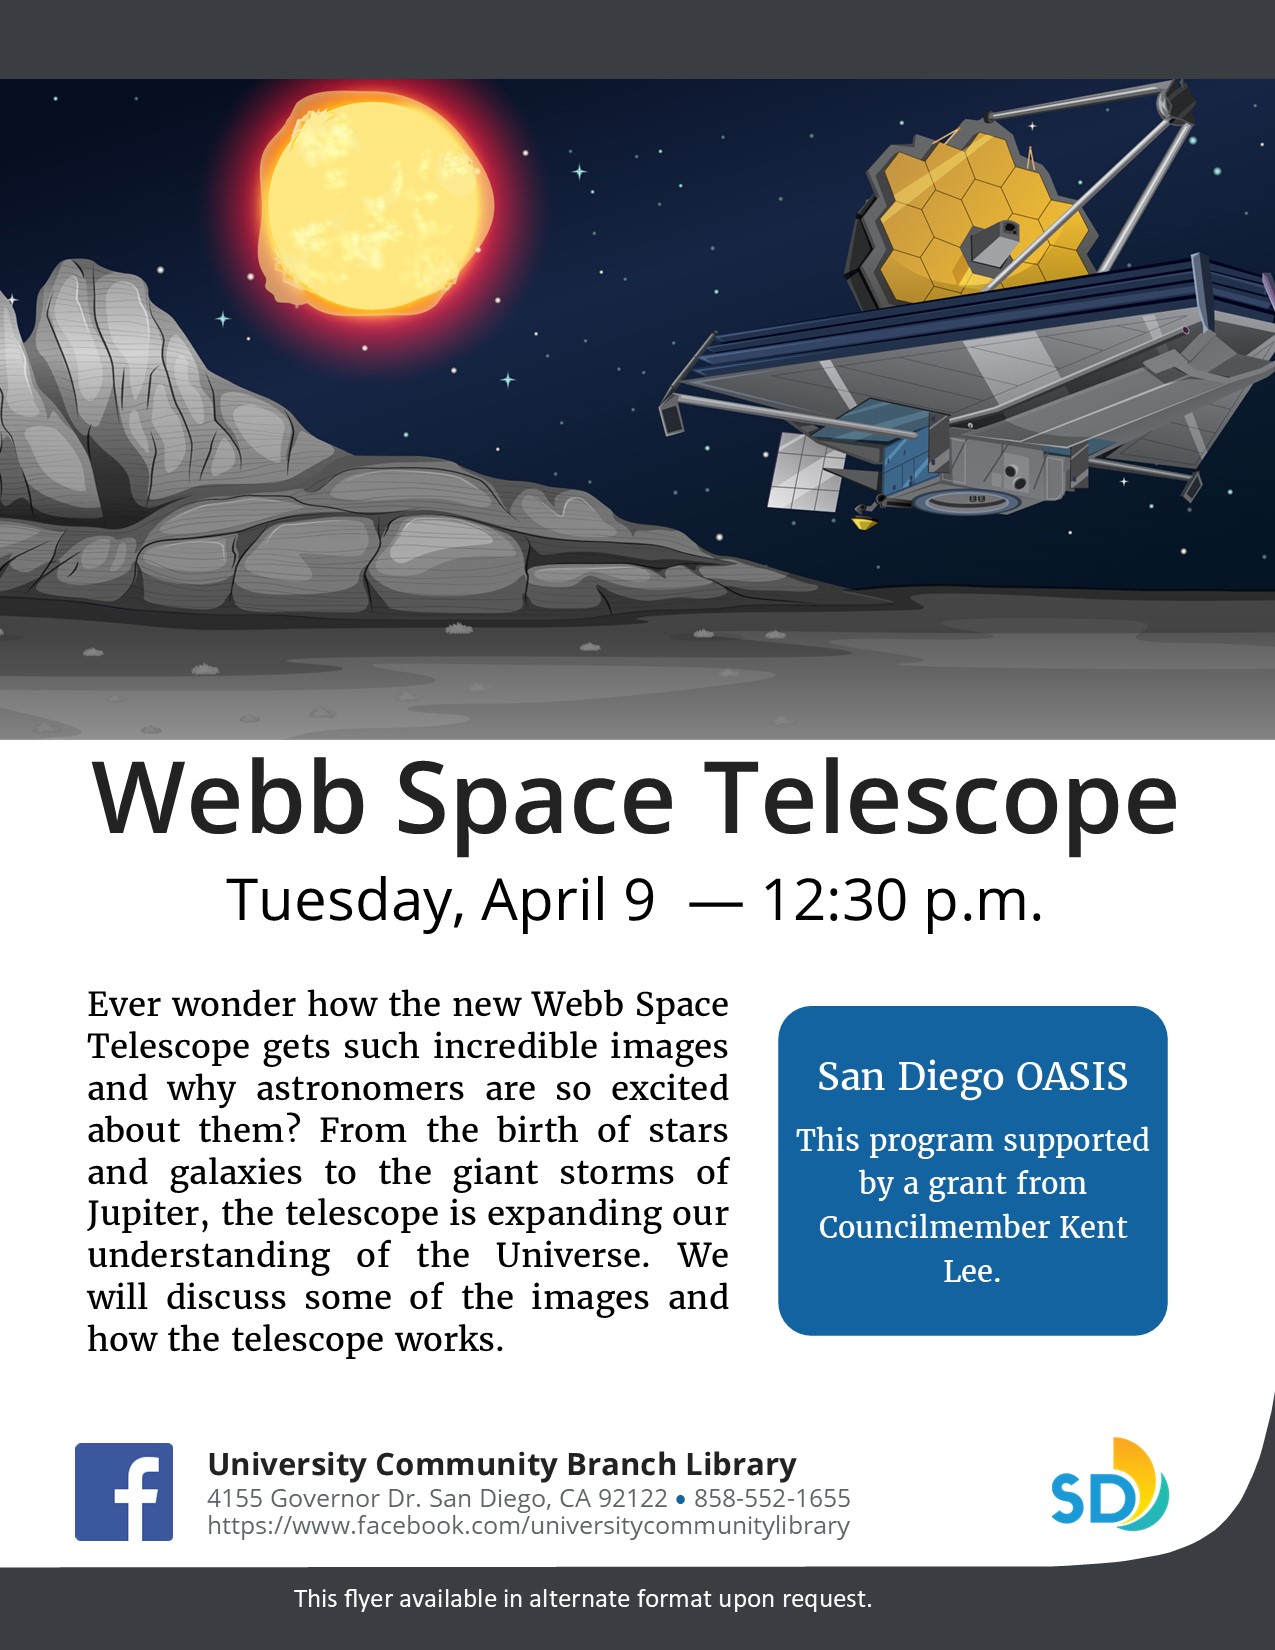 Flyer with a cartoon drawing of the Webb Telescope on a lunar surface with an orange sun in the background. 